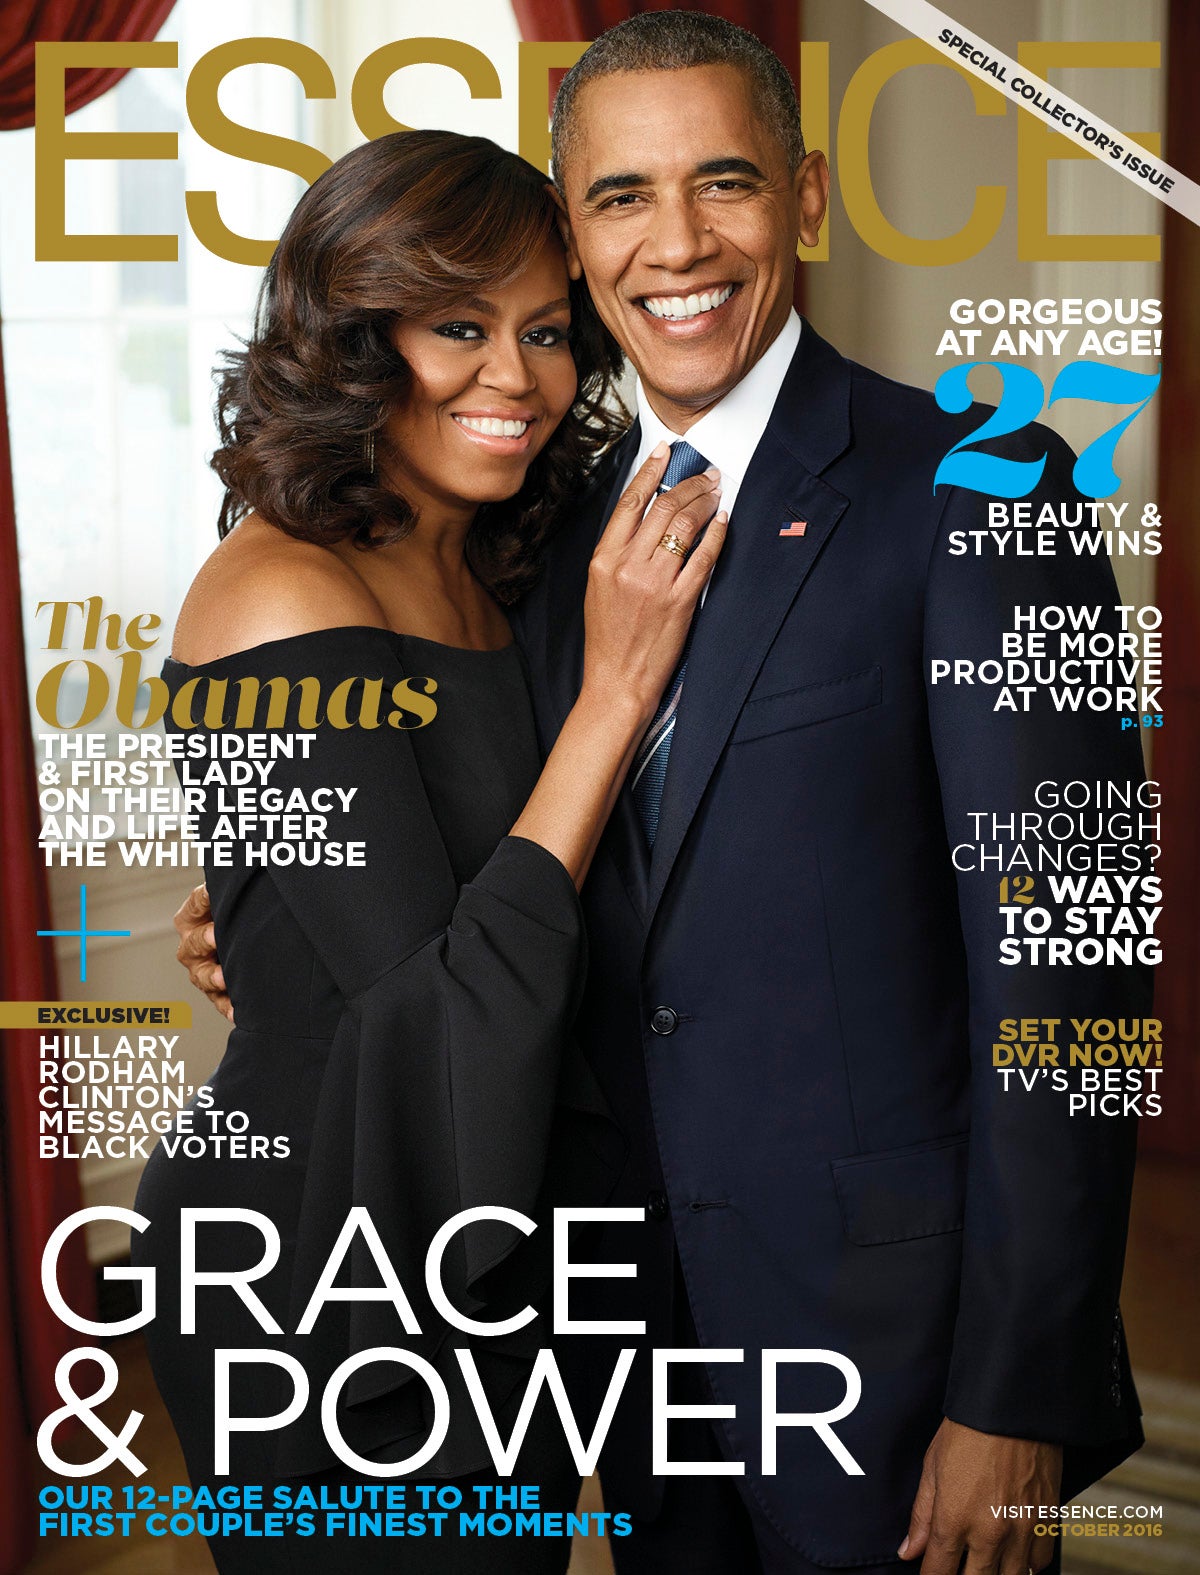 President and Michelle Obama’s Legacy Lives on in October Issue of ESSENCE
